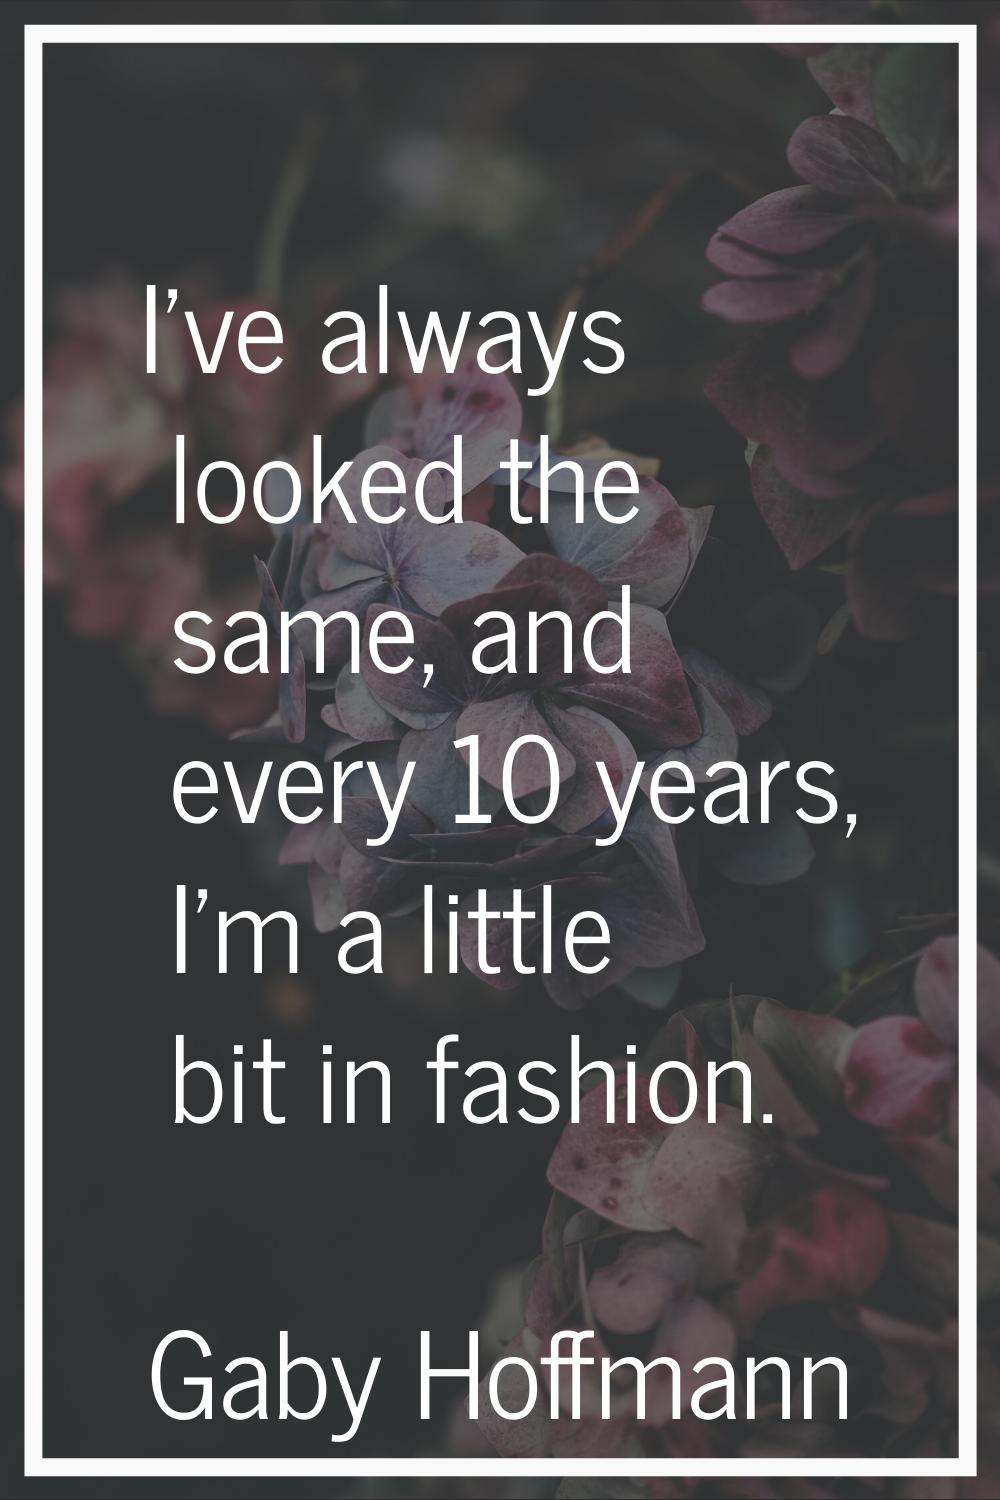 I've always looked the same, and every 10 years, I'm a little bit in fashion.